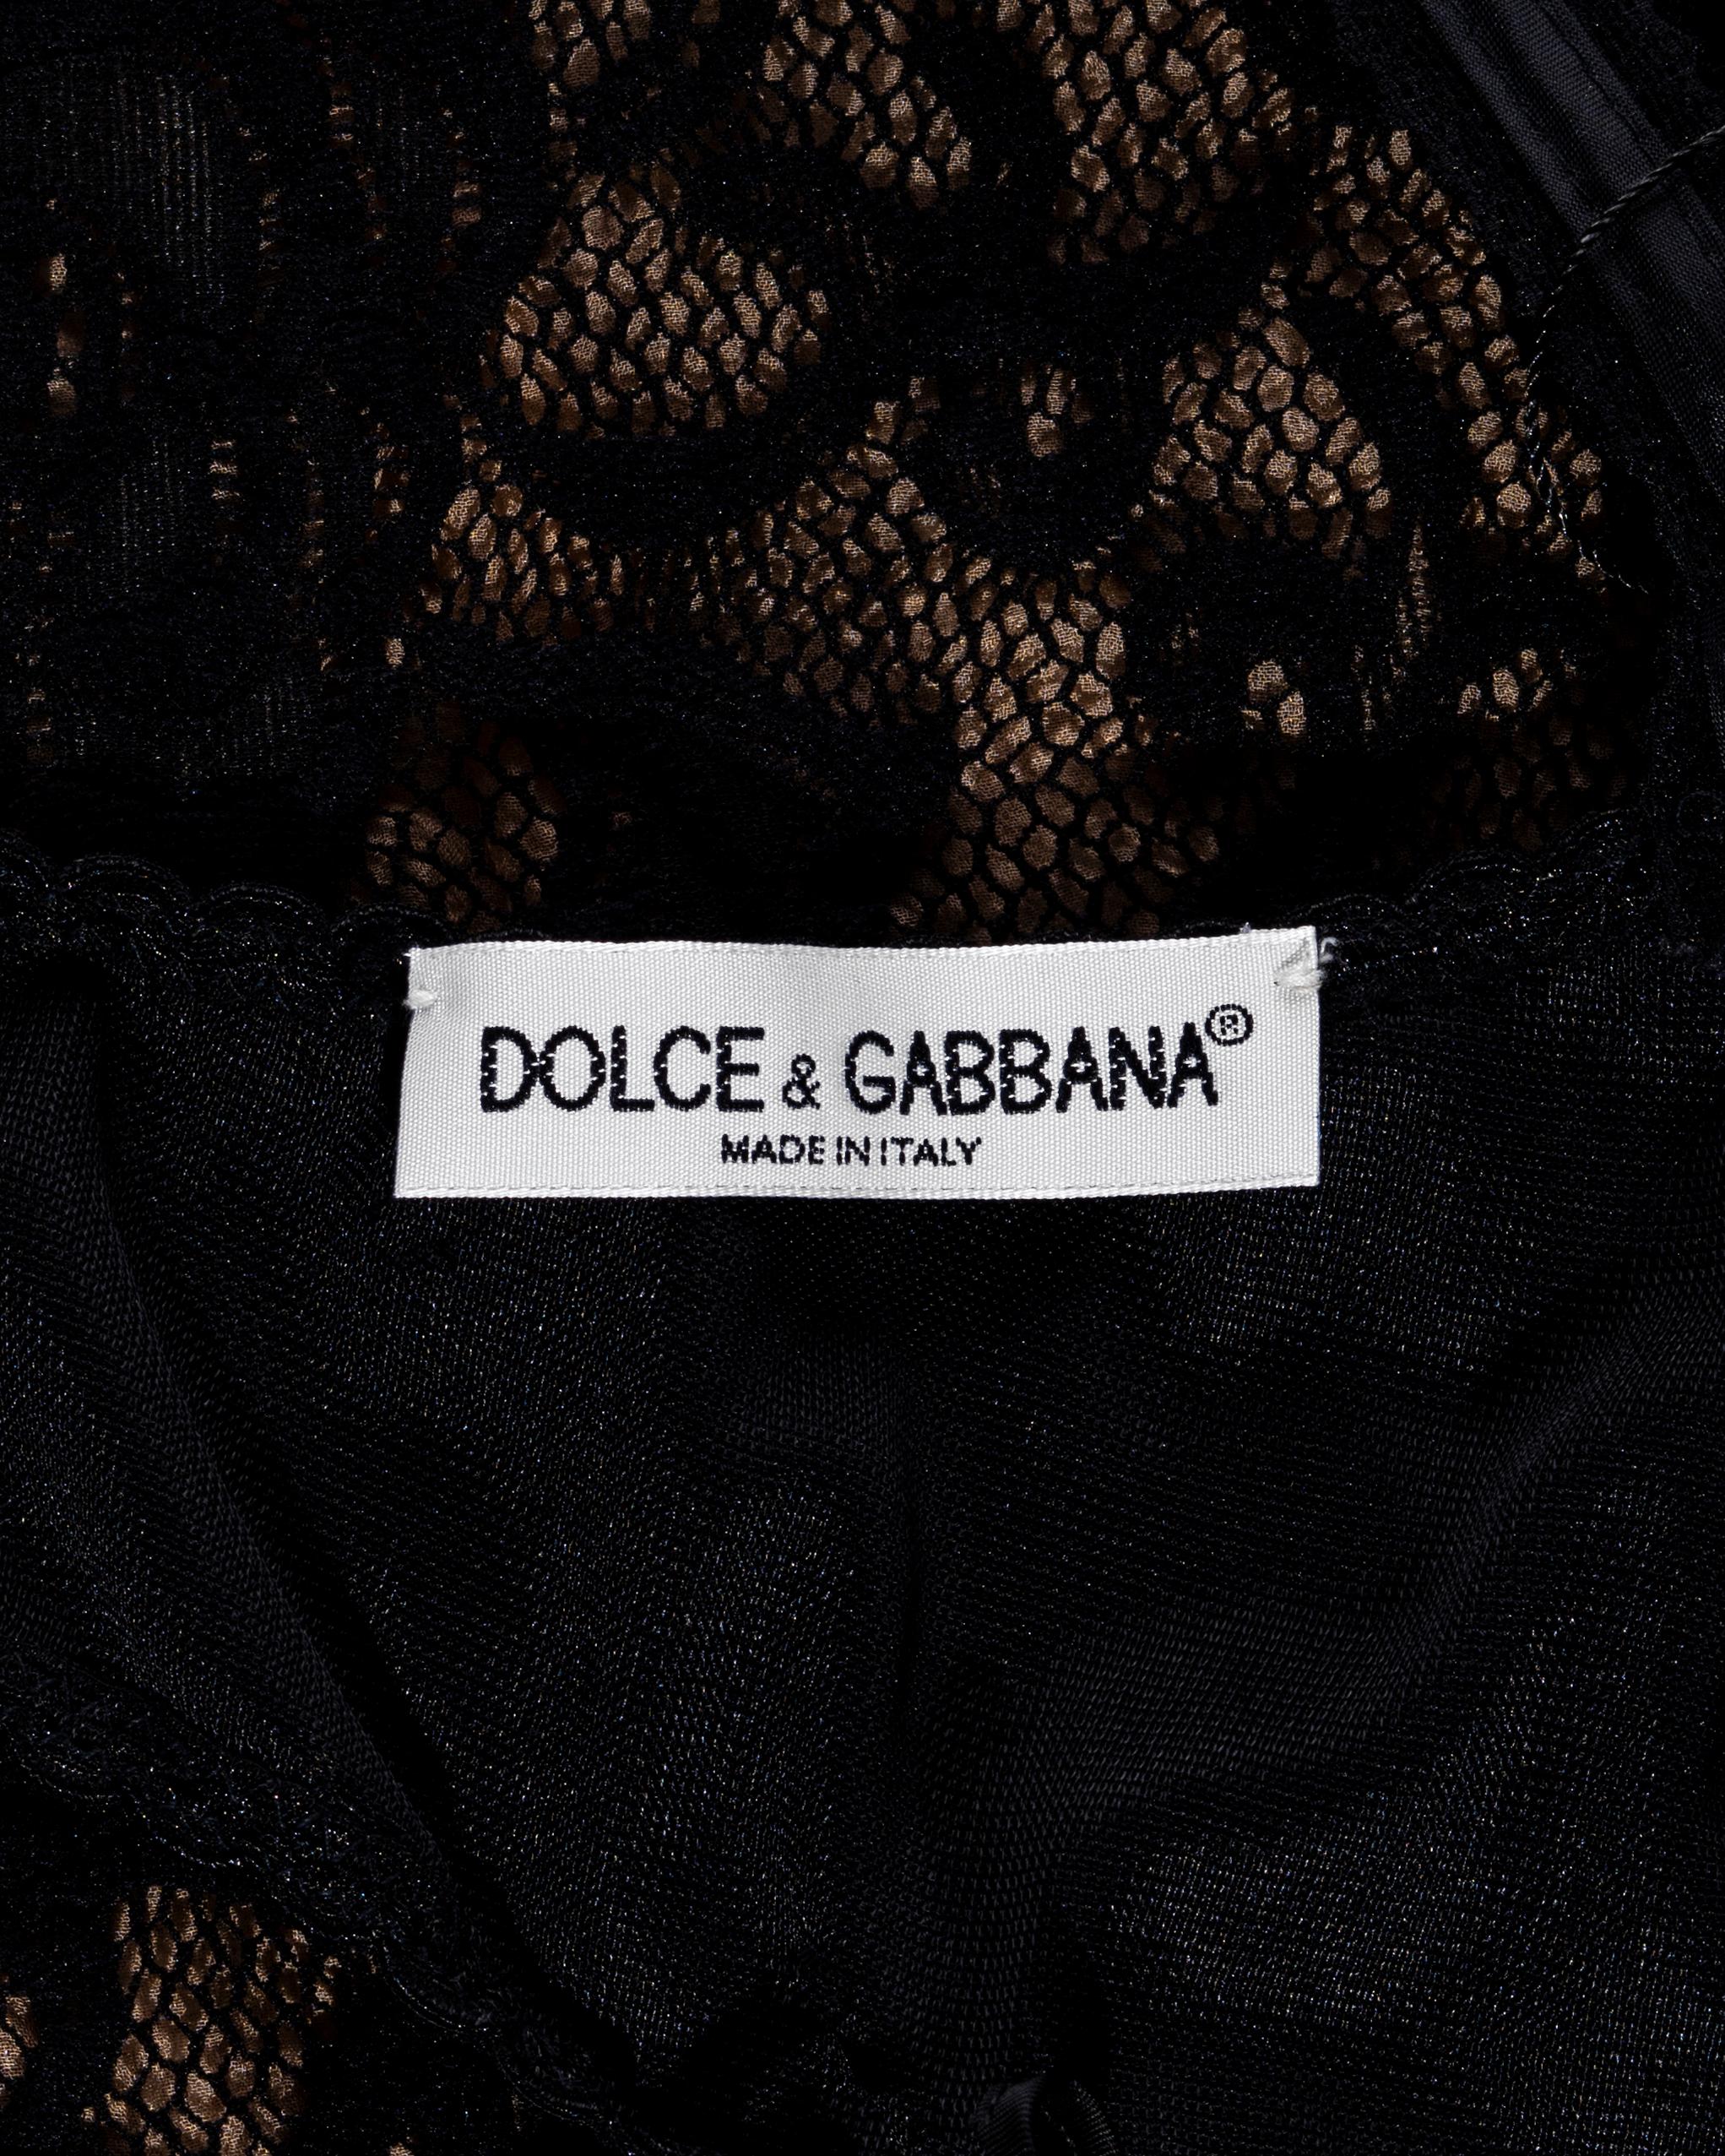 Dolce & Gabbana black lace evening dress with attached bra, ss 1997 3